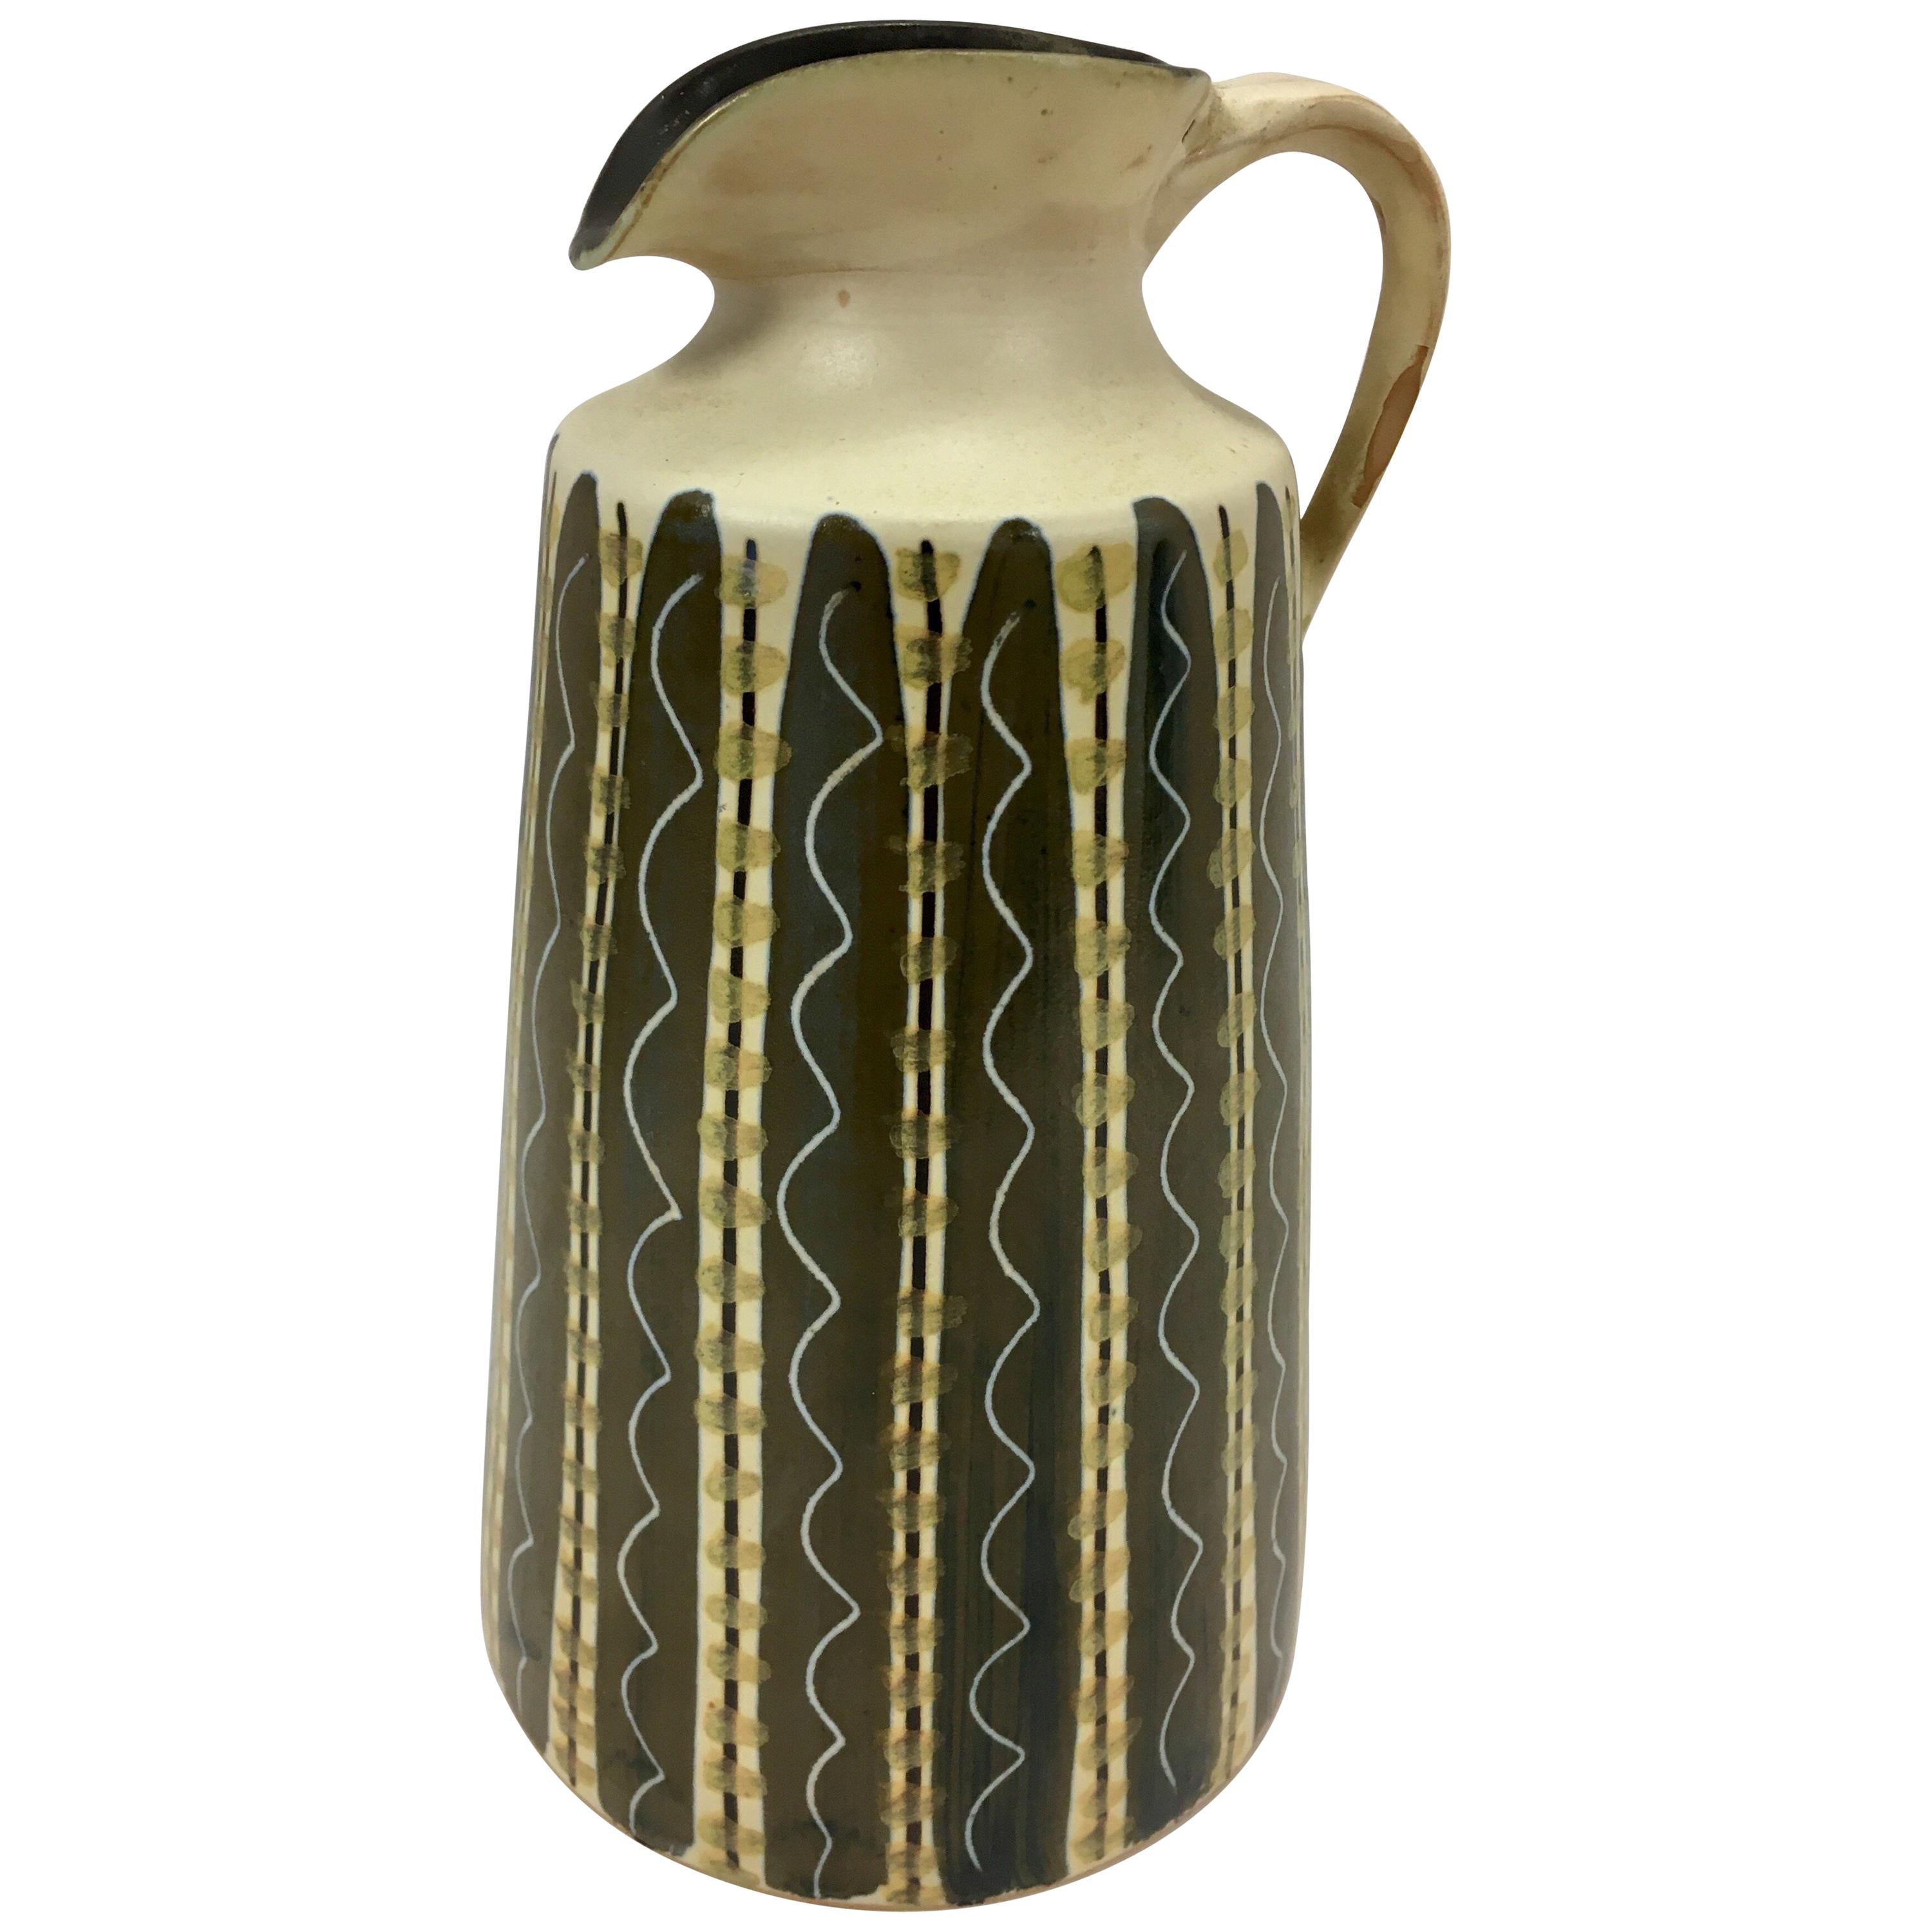 Signed Ceramic Water Pitcher Ady Mid-Century Modern, Italy